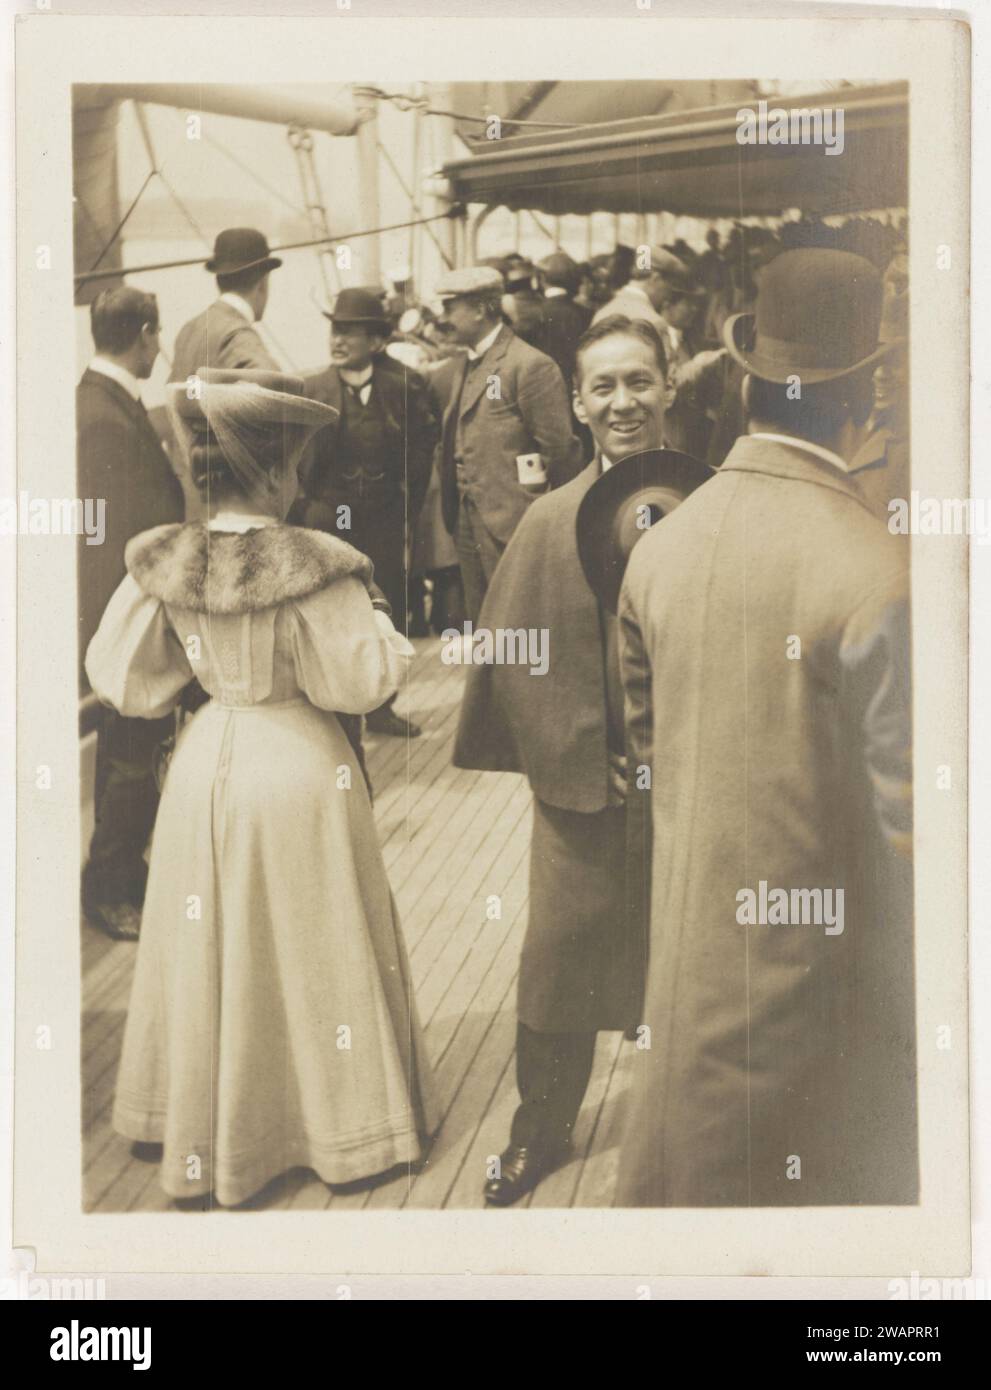 I beg your pardon, 1908 photograph Travel companions of Dolph Kessler on the upper deck of The Empress of India traveling from Yokohama to Vancouver, with white cap in the background Henri Detding, Mrs. Deterding in the foreground. Part of Dolph Kessler's photo album with recordings he made during his stay in England and On a world trip that he went as secretary of Henri Detding (director of Royal Oil) to the Dutch East Indies, Japan, China and the United States, between 1906 and 1908. Yokohama cardboard. photographic support gelatin silver print Stock Photo